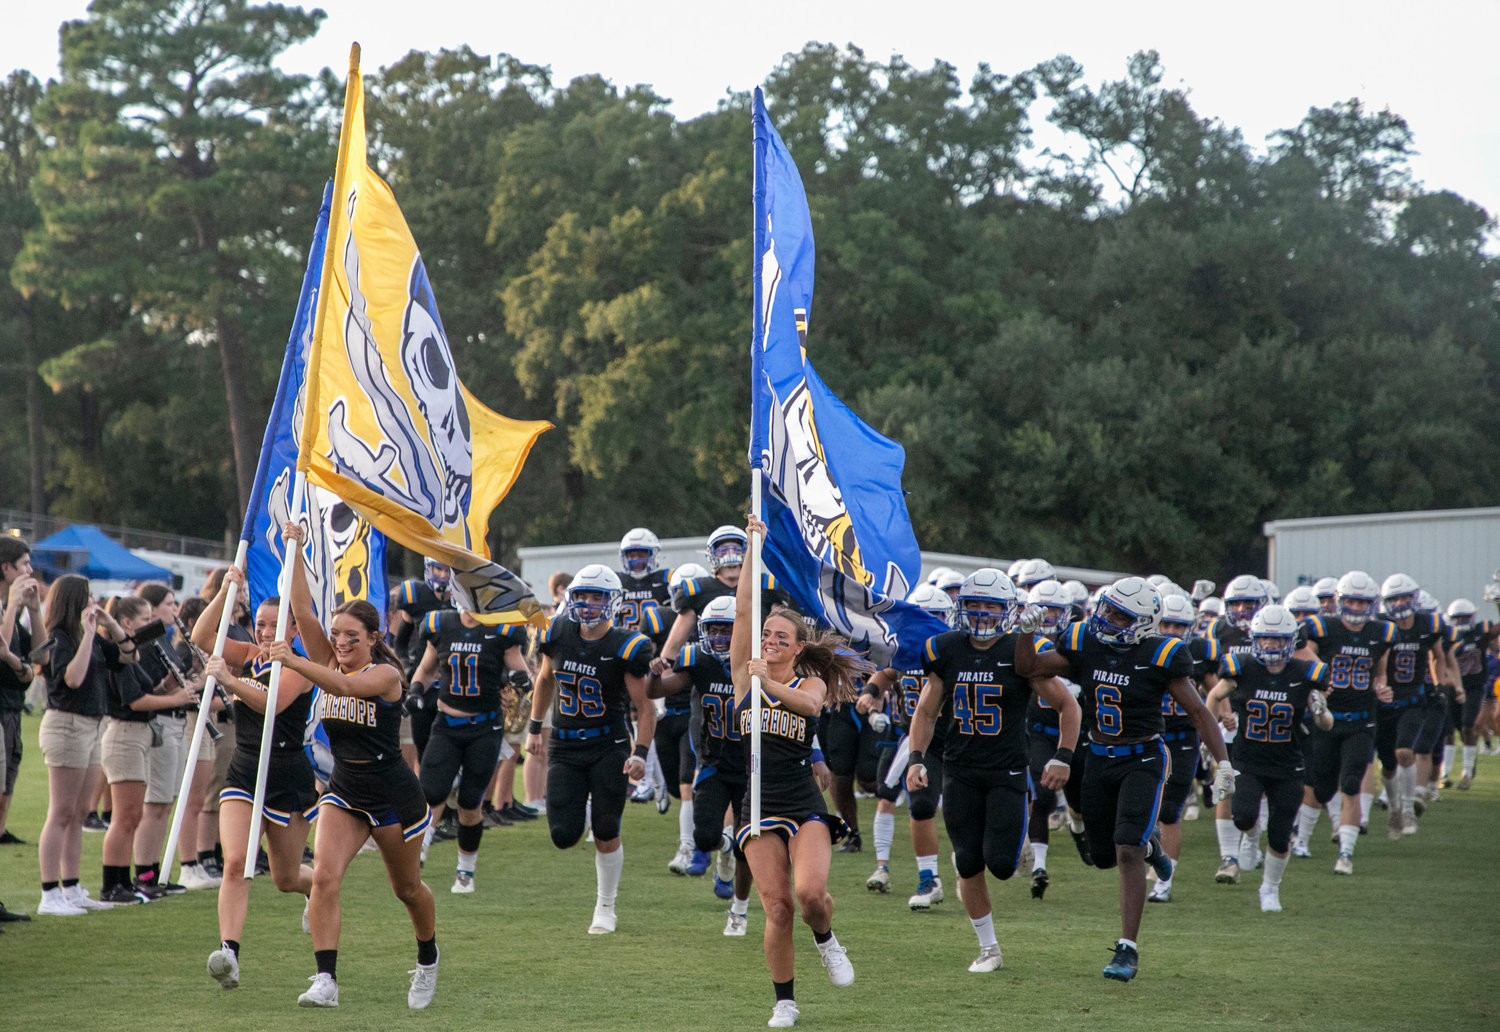 The Fairhope Pirates take the field for their season-opening contest against the Spanish Fort Toros Aug. 19 at Fairhope Municipal Stadium. Entering Week 6 of the season, the Pirates are slotted at No. 2 in the Alabama Sports Writers Association’s rankings for the second straight week.